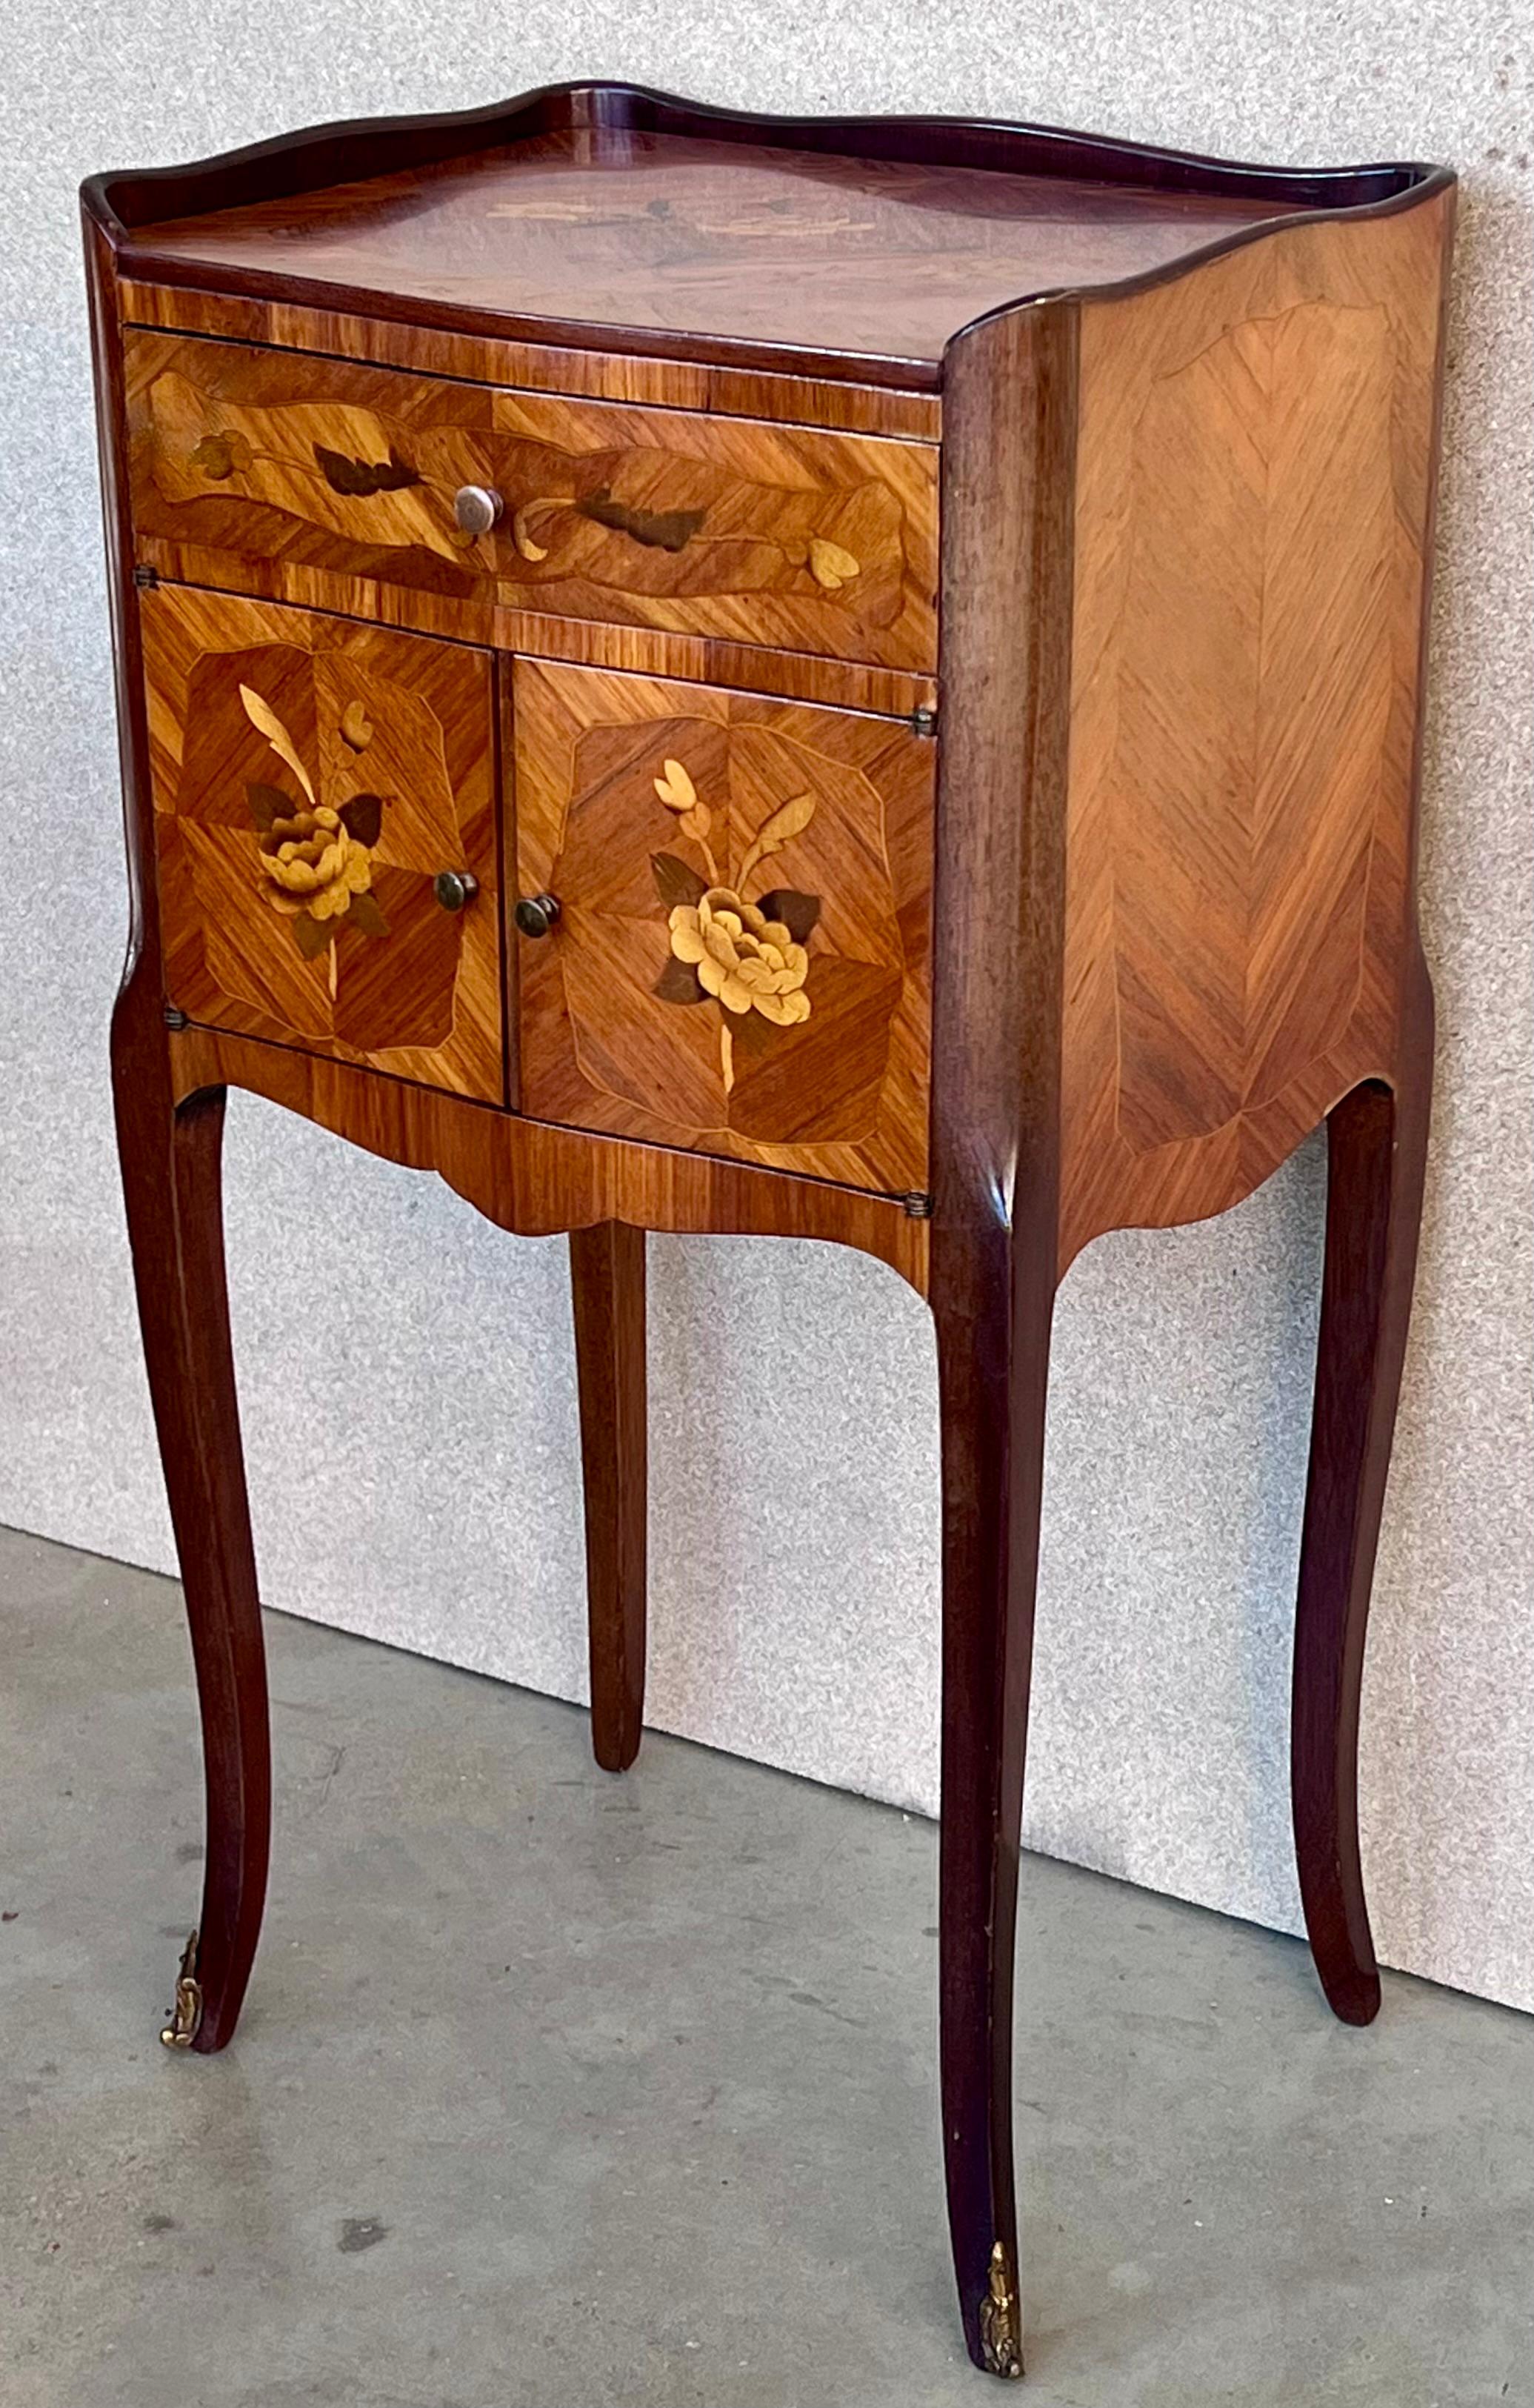 Louis XV style kingwood bedside tables with a drawer and a front door, with floral marquetry on the top and front. The pieces retain their original and beautiful floral marquetry covers and are adorned with highly decorative and finely detailed